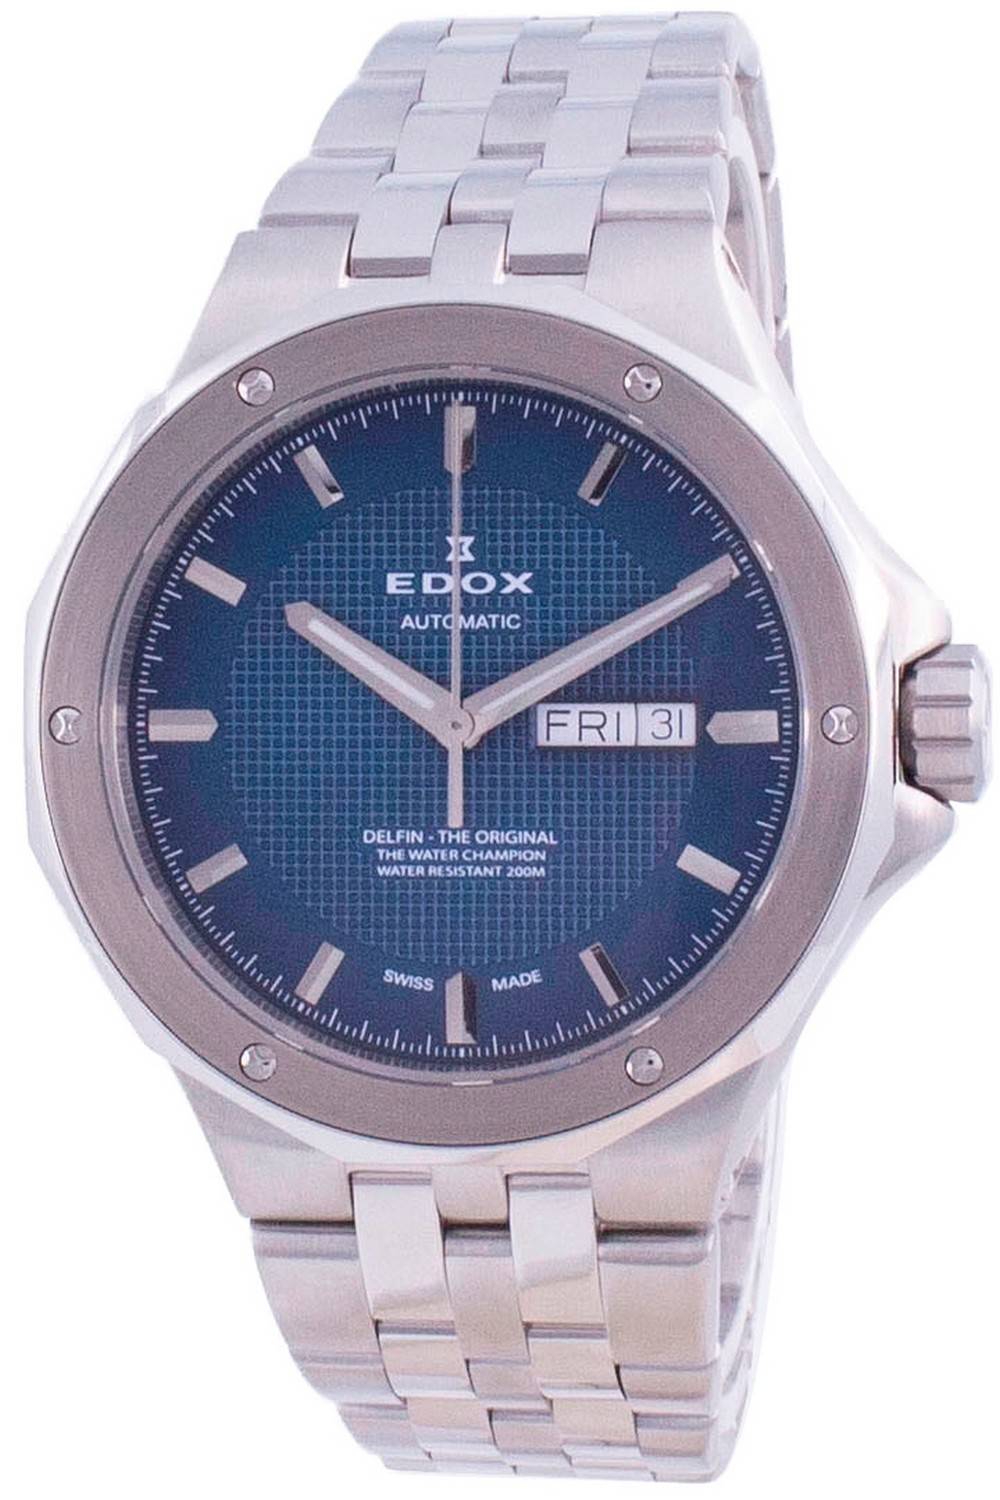 Edox Delfin Day Date Automatic 880053MBUIN 88005 3M BUIN 200M Men's Watch